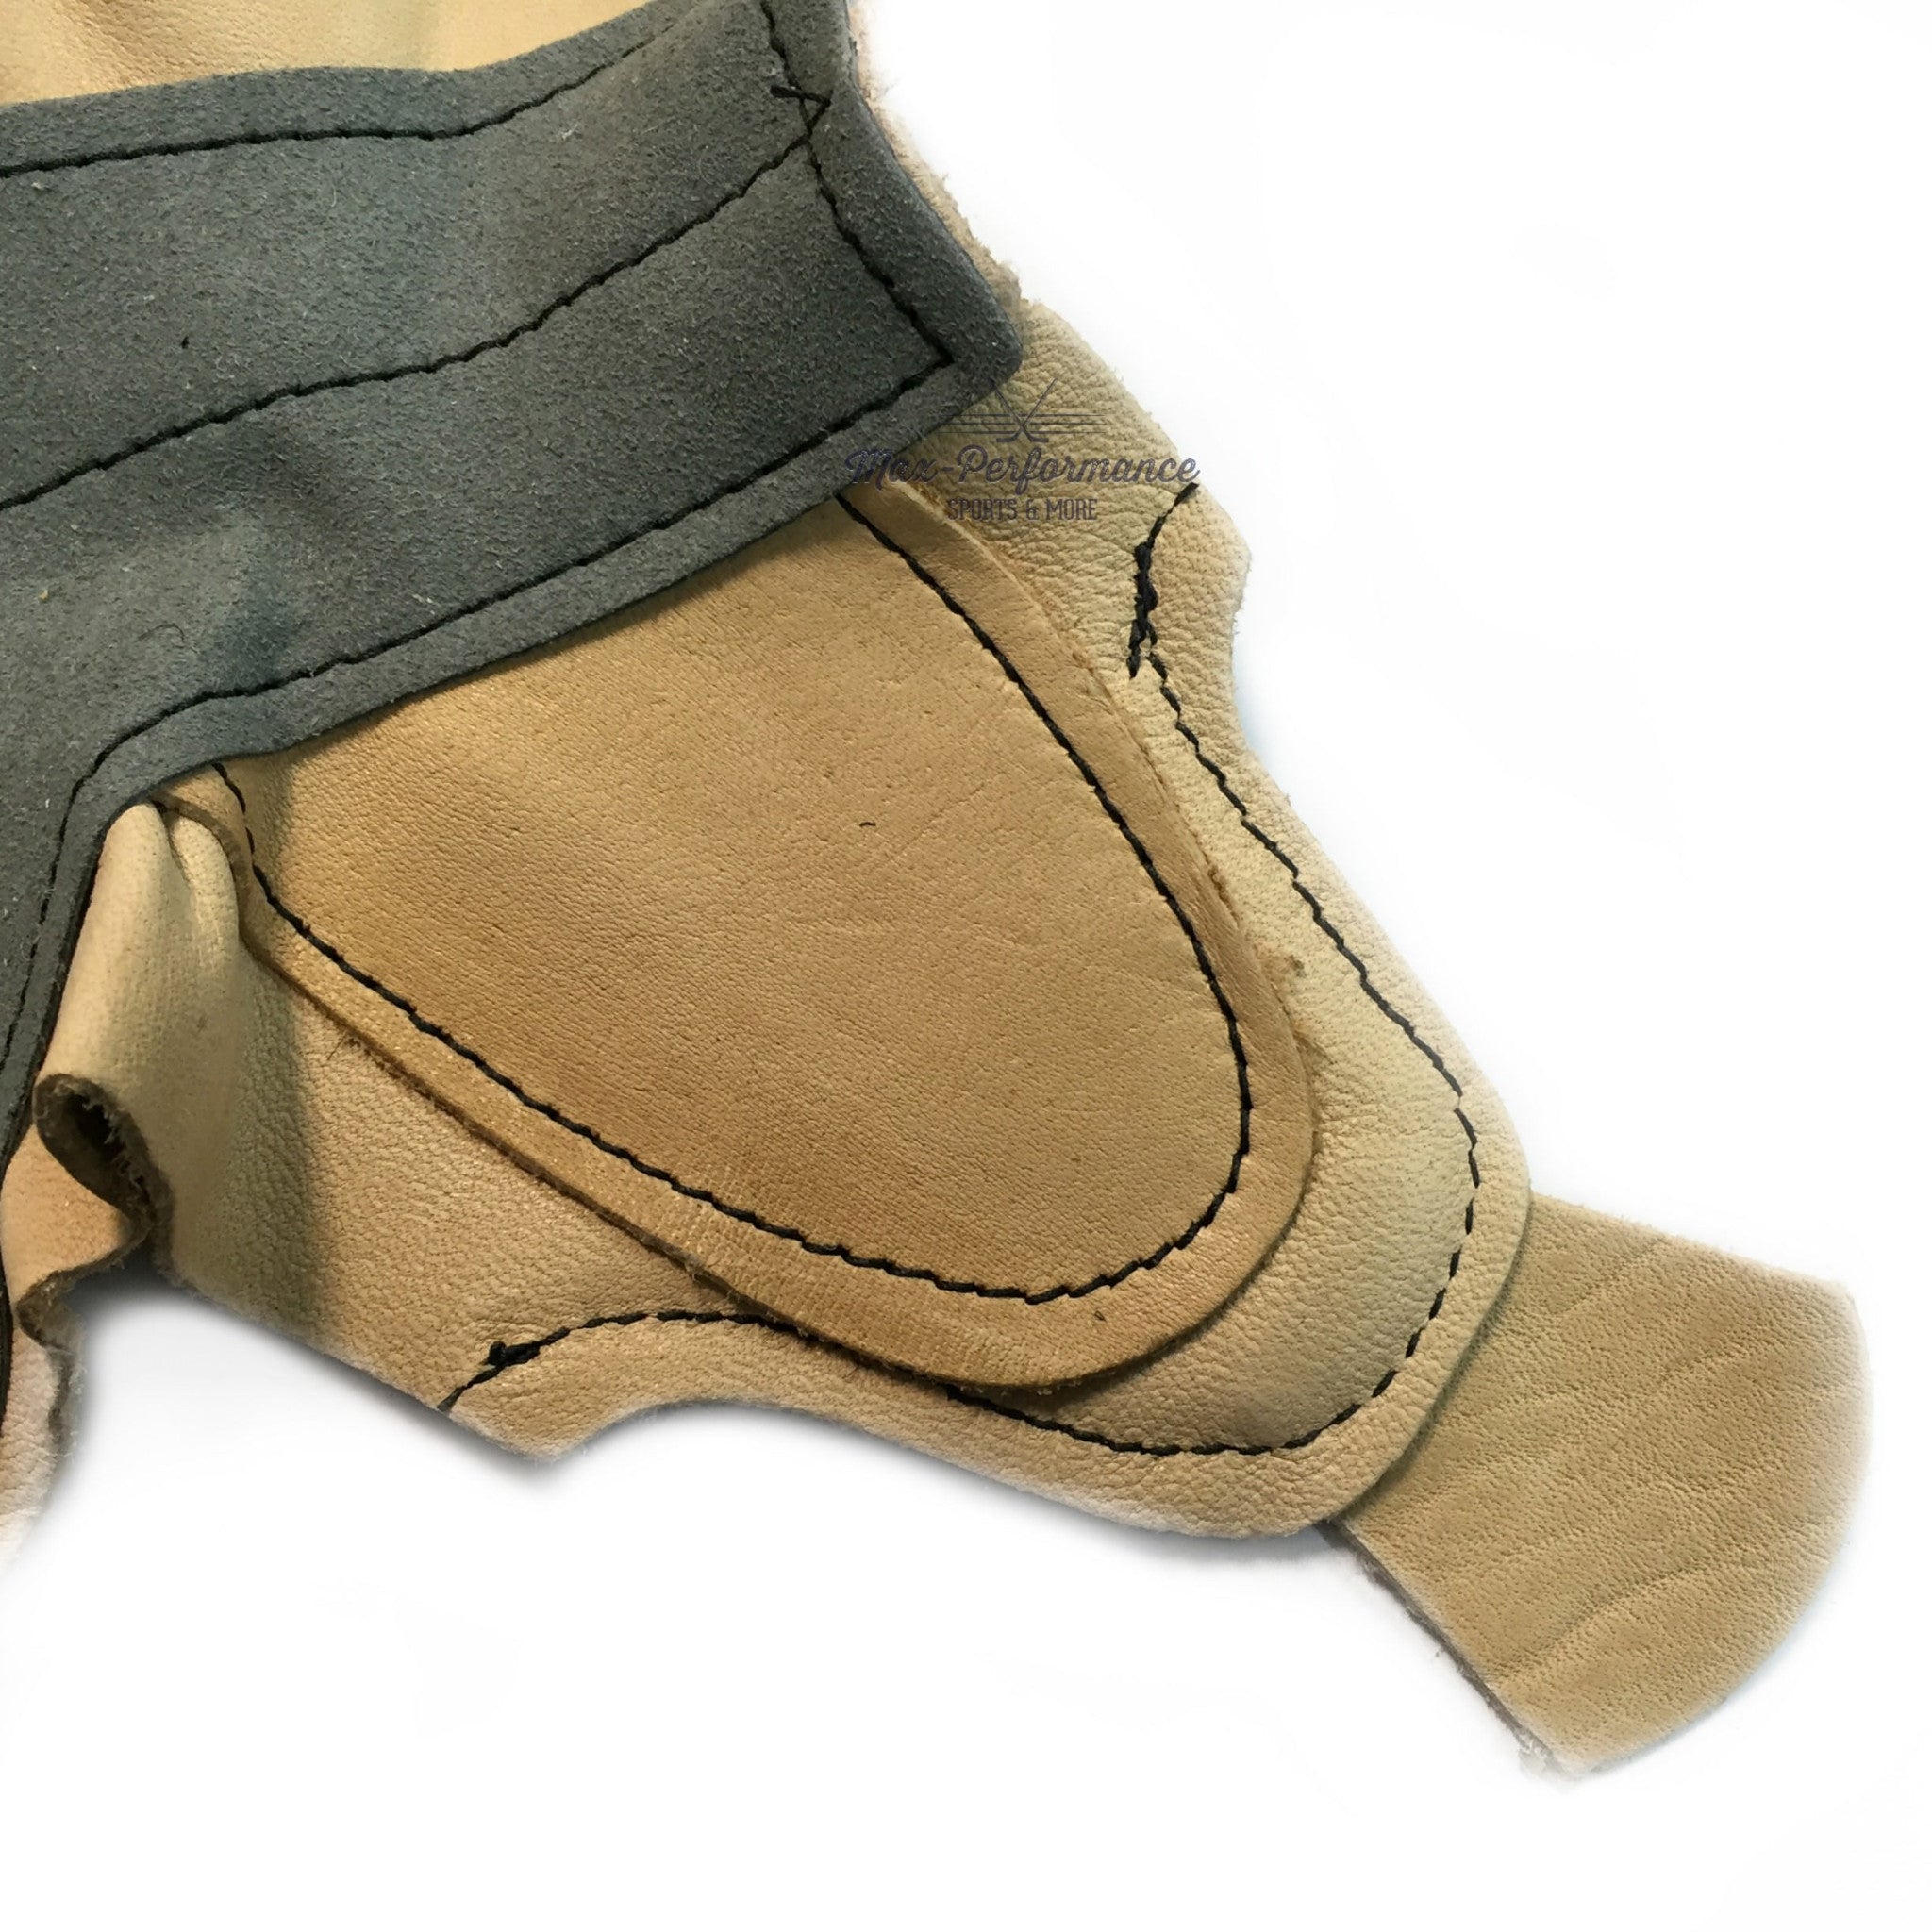 Nash Pro Horsehide Glove Replacement Palms